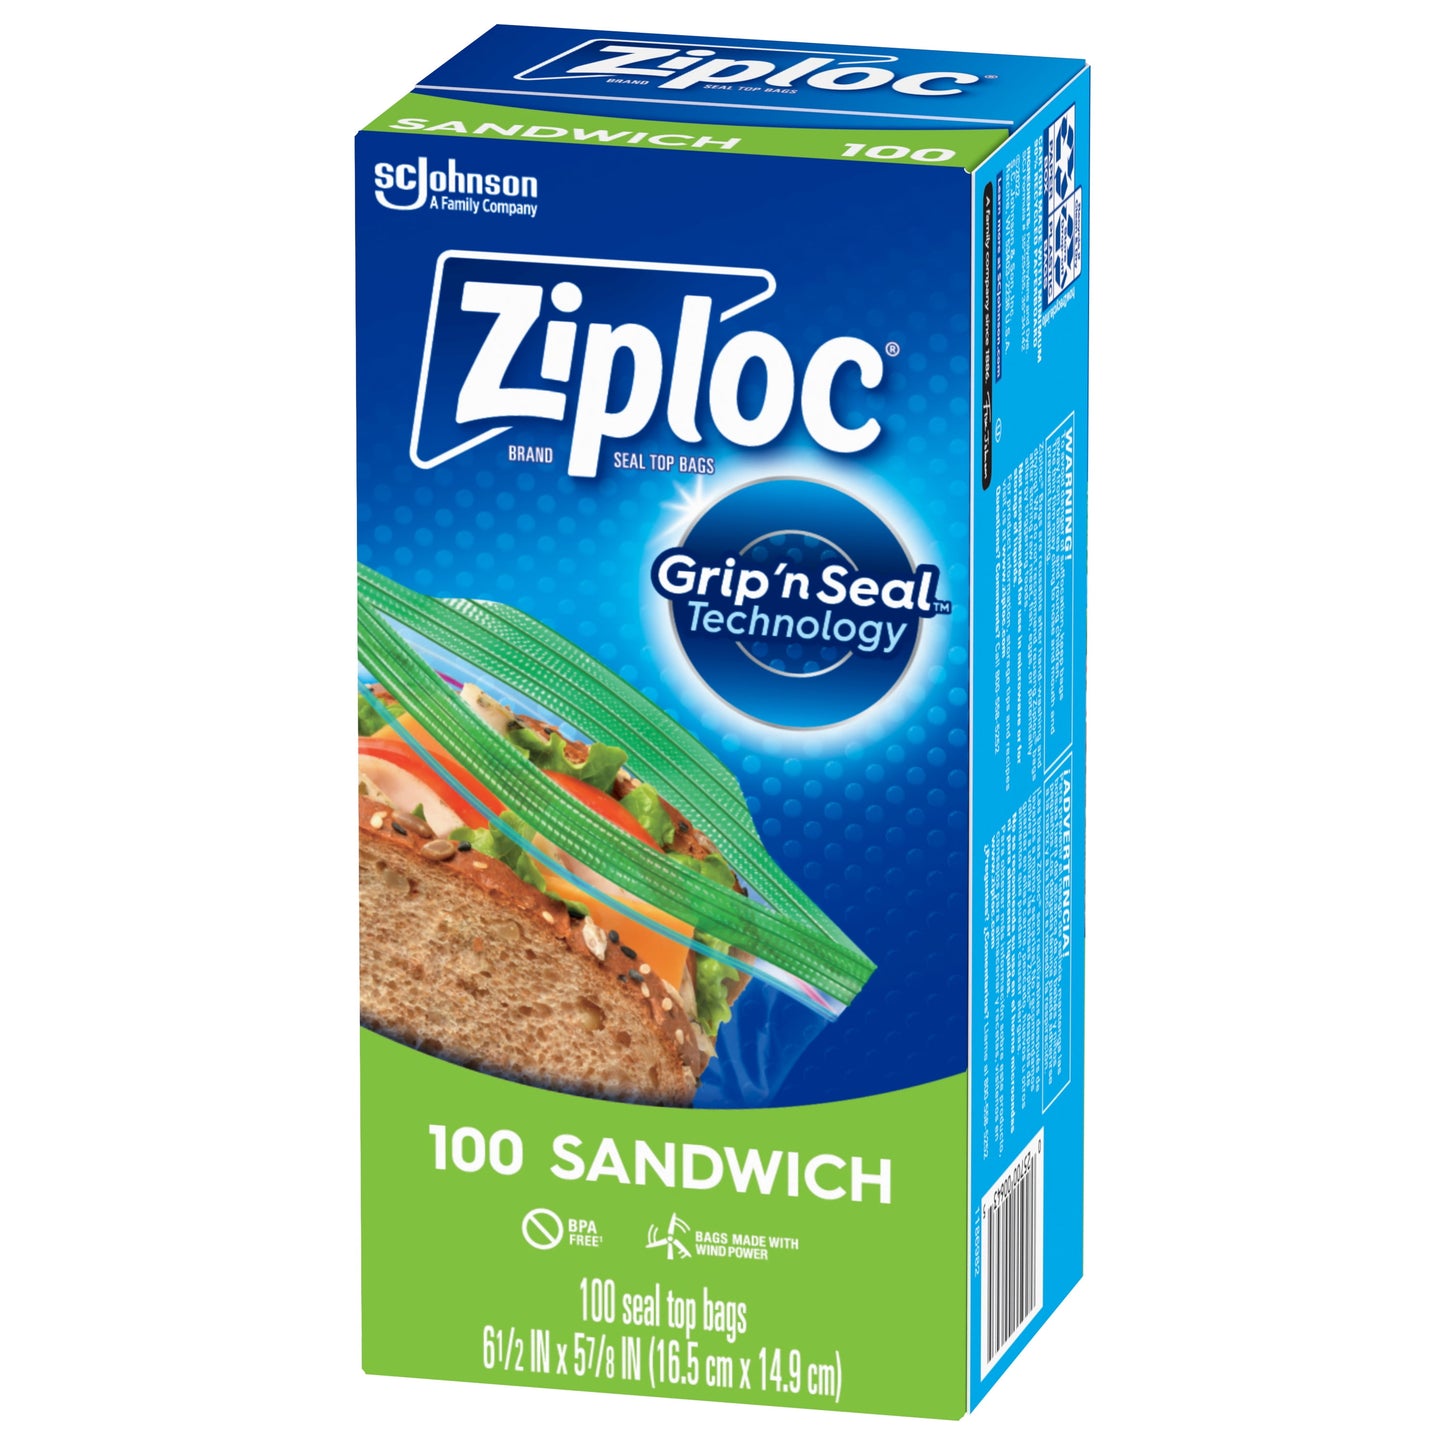 Ziploc® Brand Sandwich Bags with Grip 'n Seal Technology, 100 Count